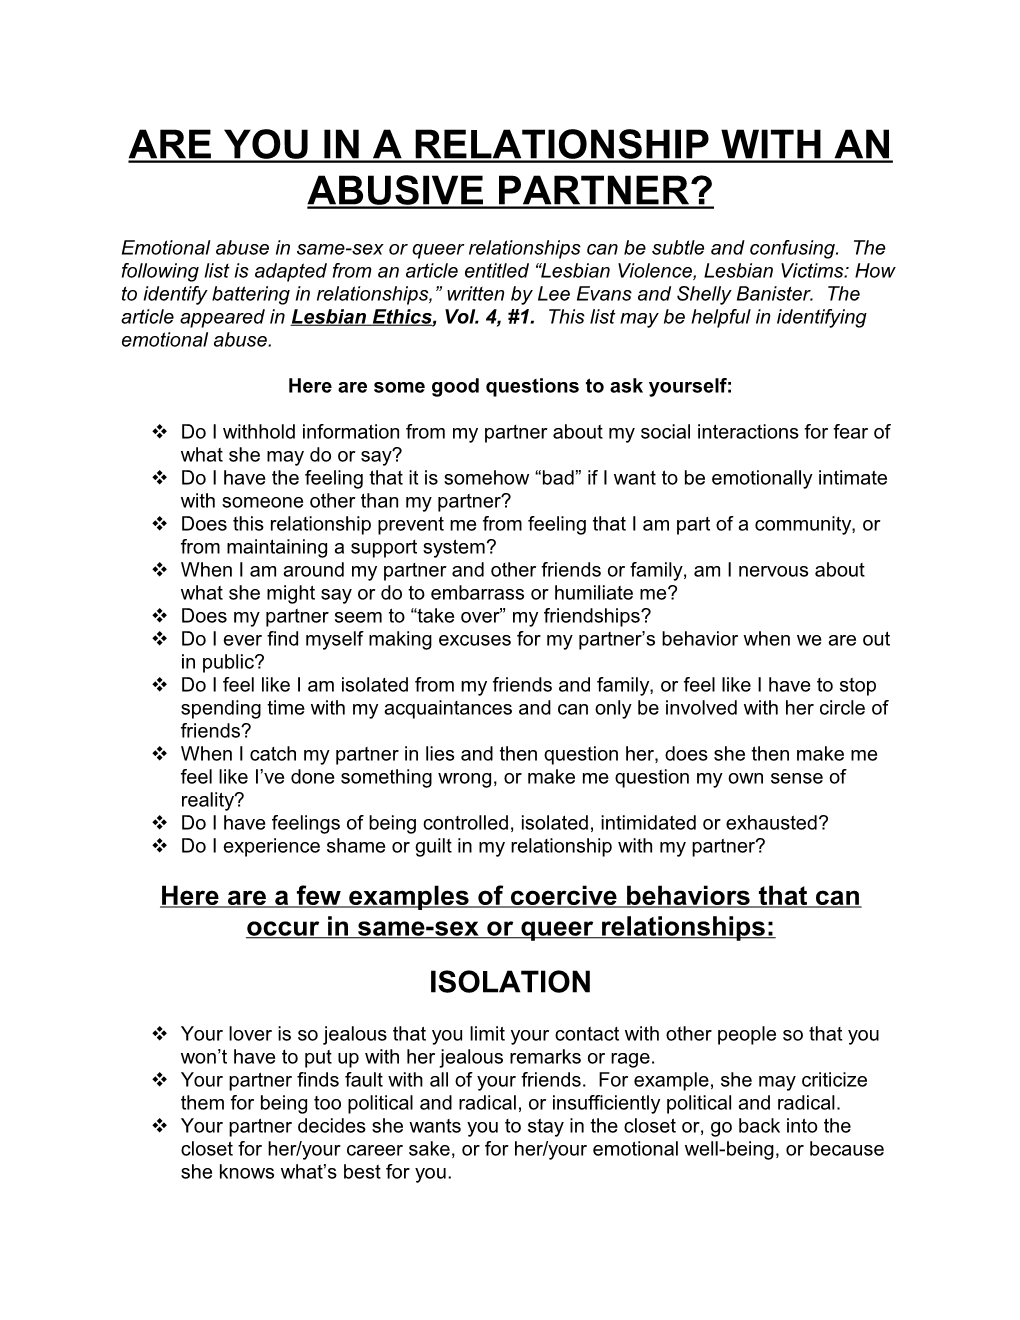 Are You in a Relationship with an Abusive Woman?